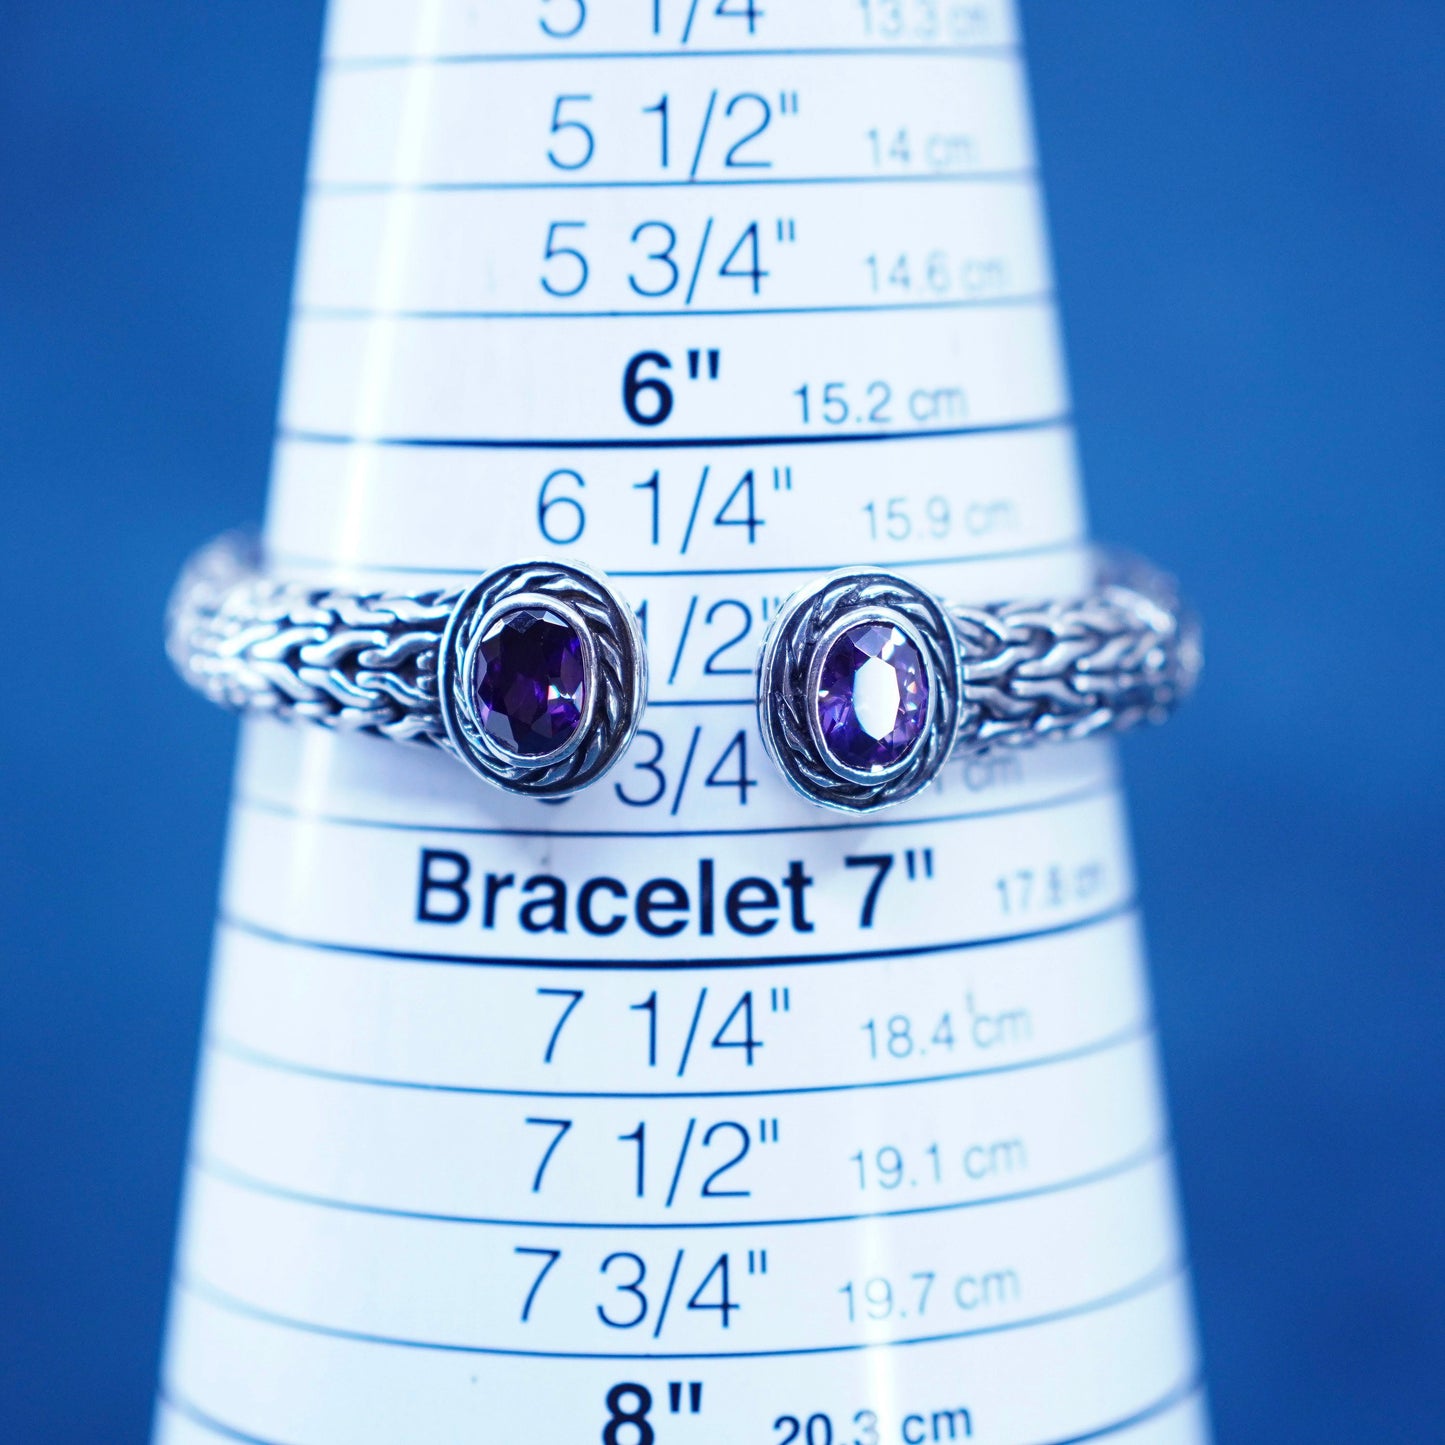 6.5”, sterling silver handmade bracelet, 925 cable cuff with amethyst ends